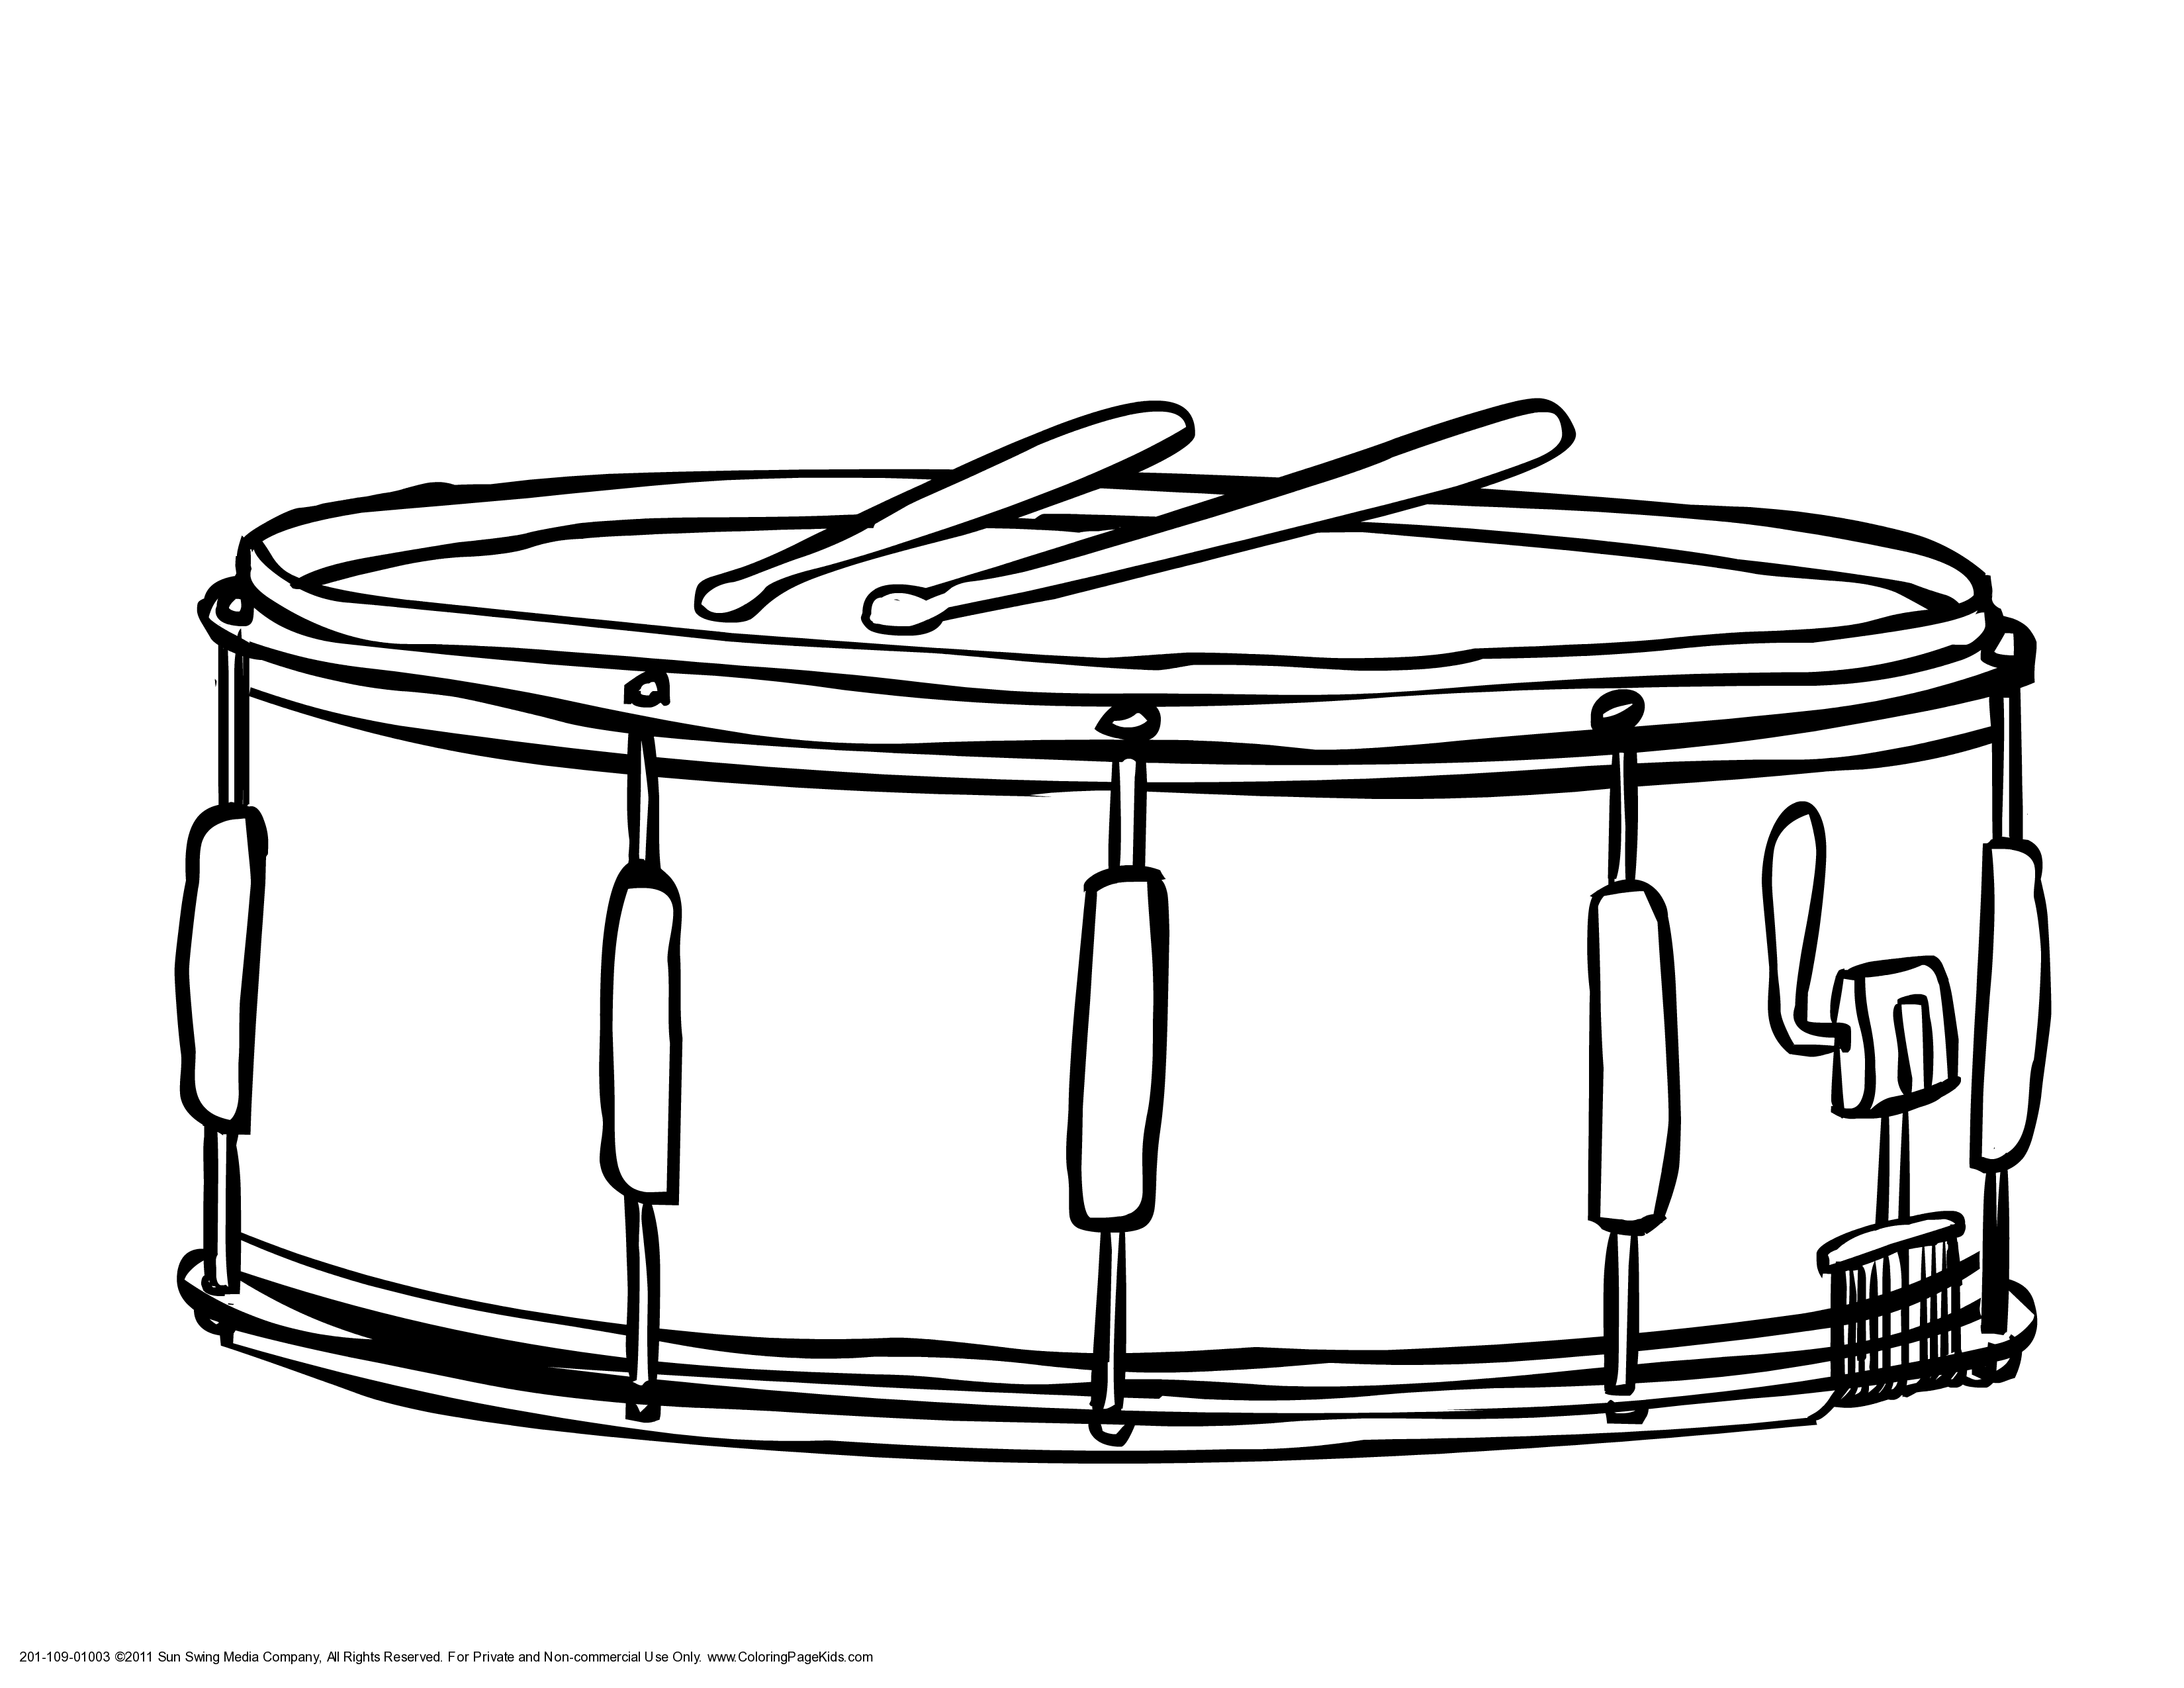 Snare Drum Clip Art - Clipart library